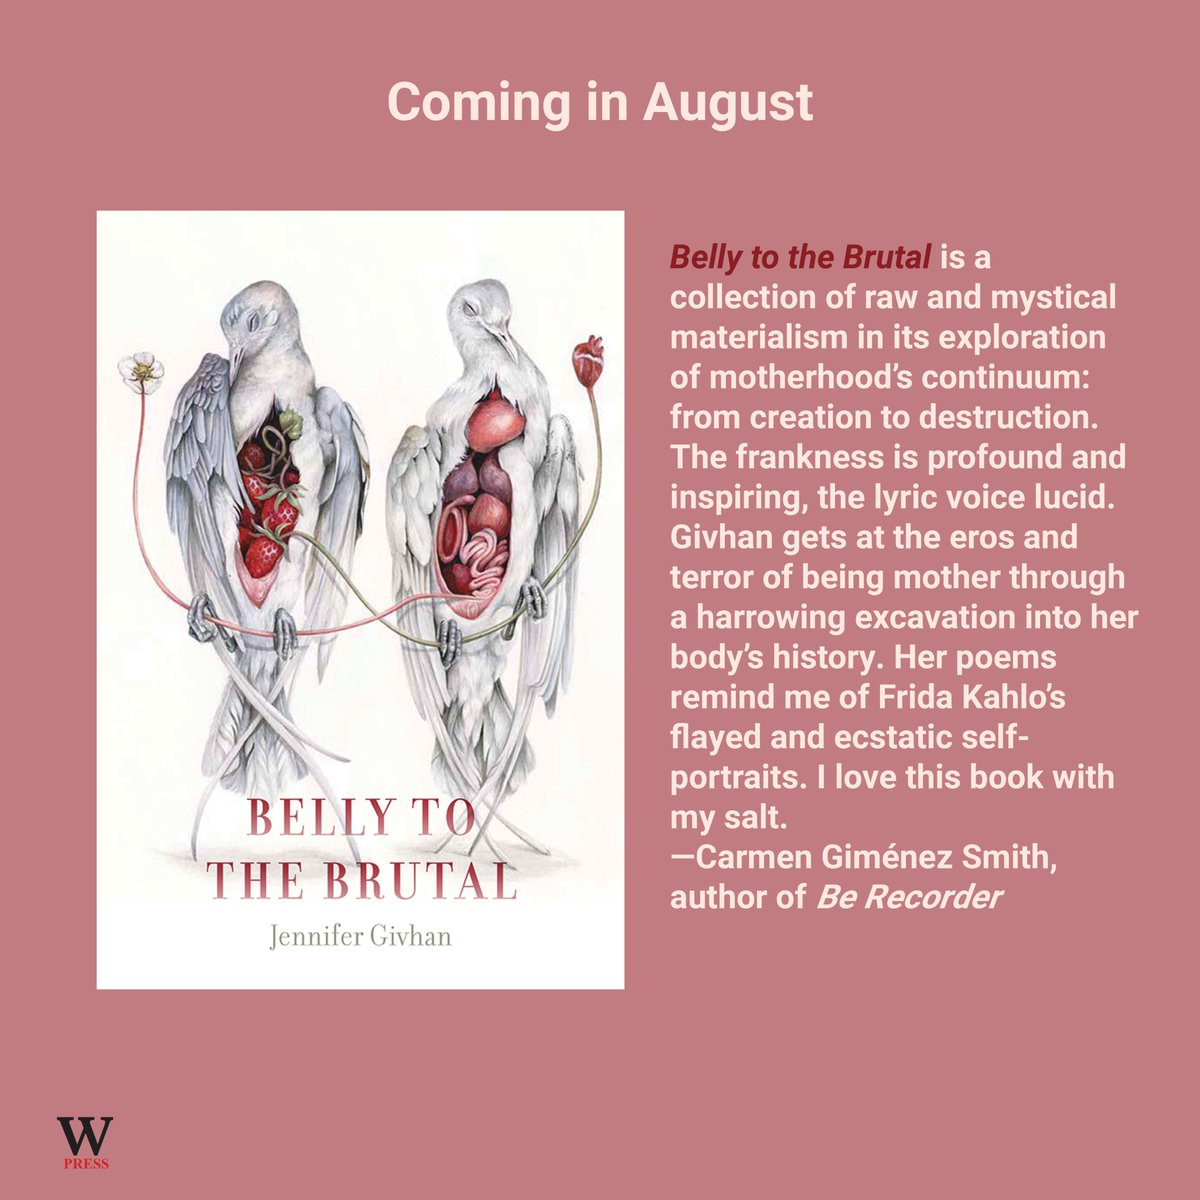 test Twitter Media - BELLY TO THE BRUTAL by Jennifer Givhan…Coming in August! 
Order now using discount code Q301 to receive 30% off. https://t.co/W8JydeLmsP
#JenniferGivhan #Latinx #Latina #brujería #newpoetry #feminist #sisters #bellytothebrutal #brujapoeta @GivhanJenn https://t.co/CEP6Bs9CfE